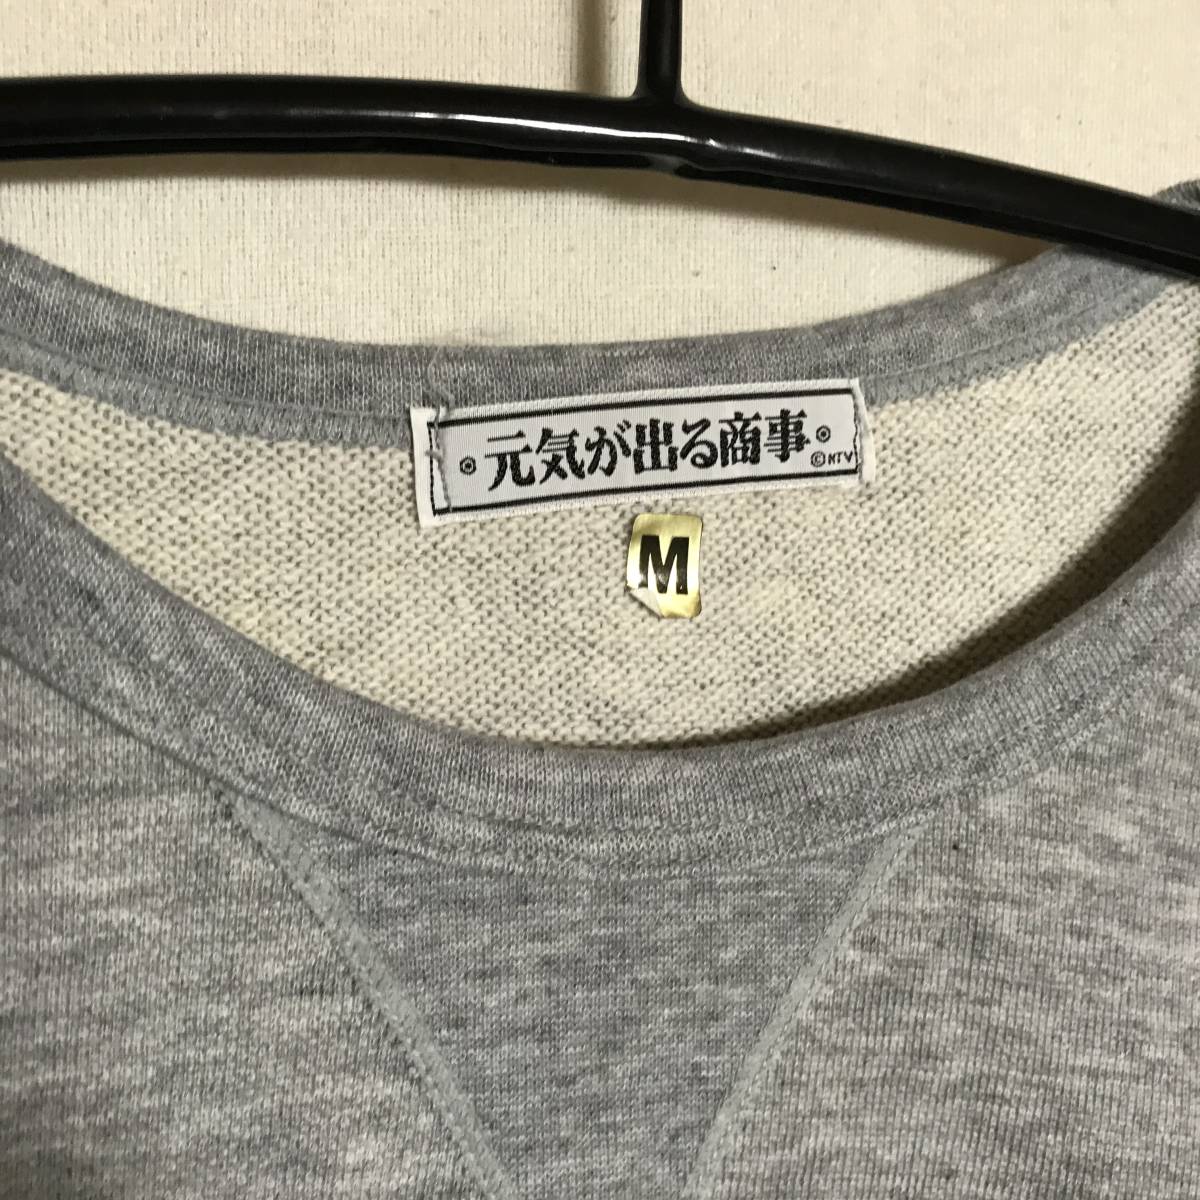  unused that time thing Japan tv heaven -years old .... origin .. go out tv . north .. next . photo print sweat sweatshirt origin .. go out commercial firm north ..